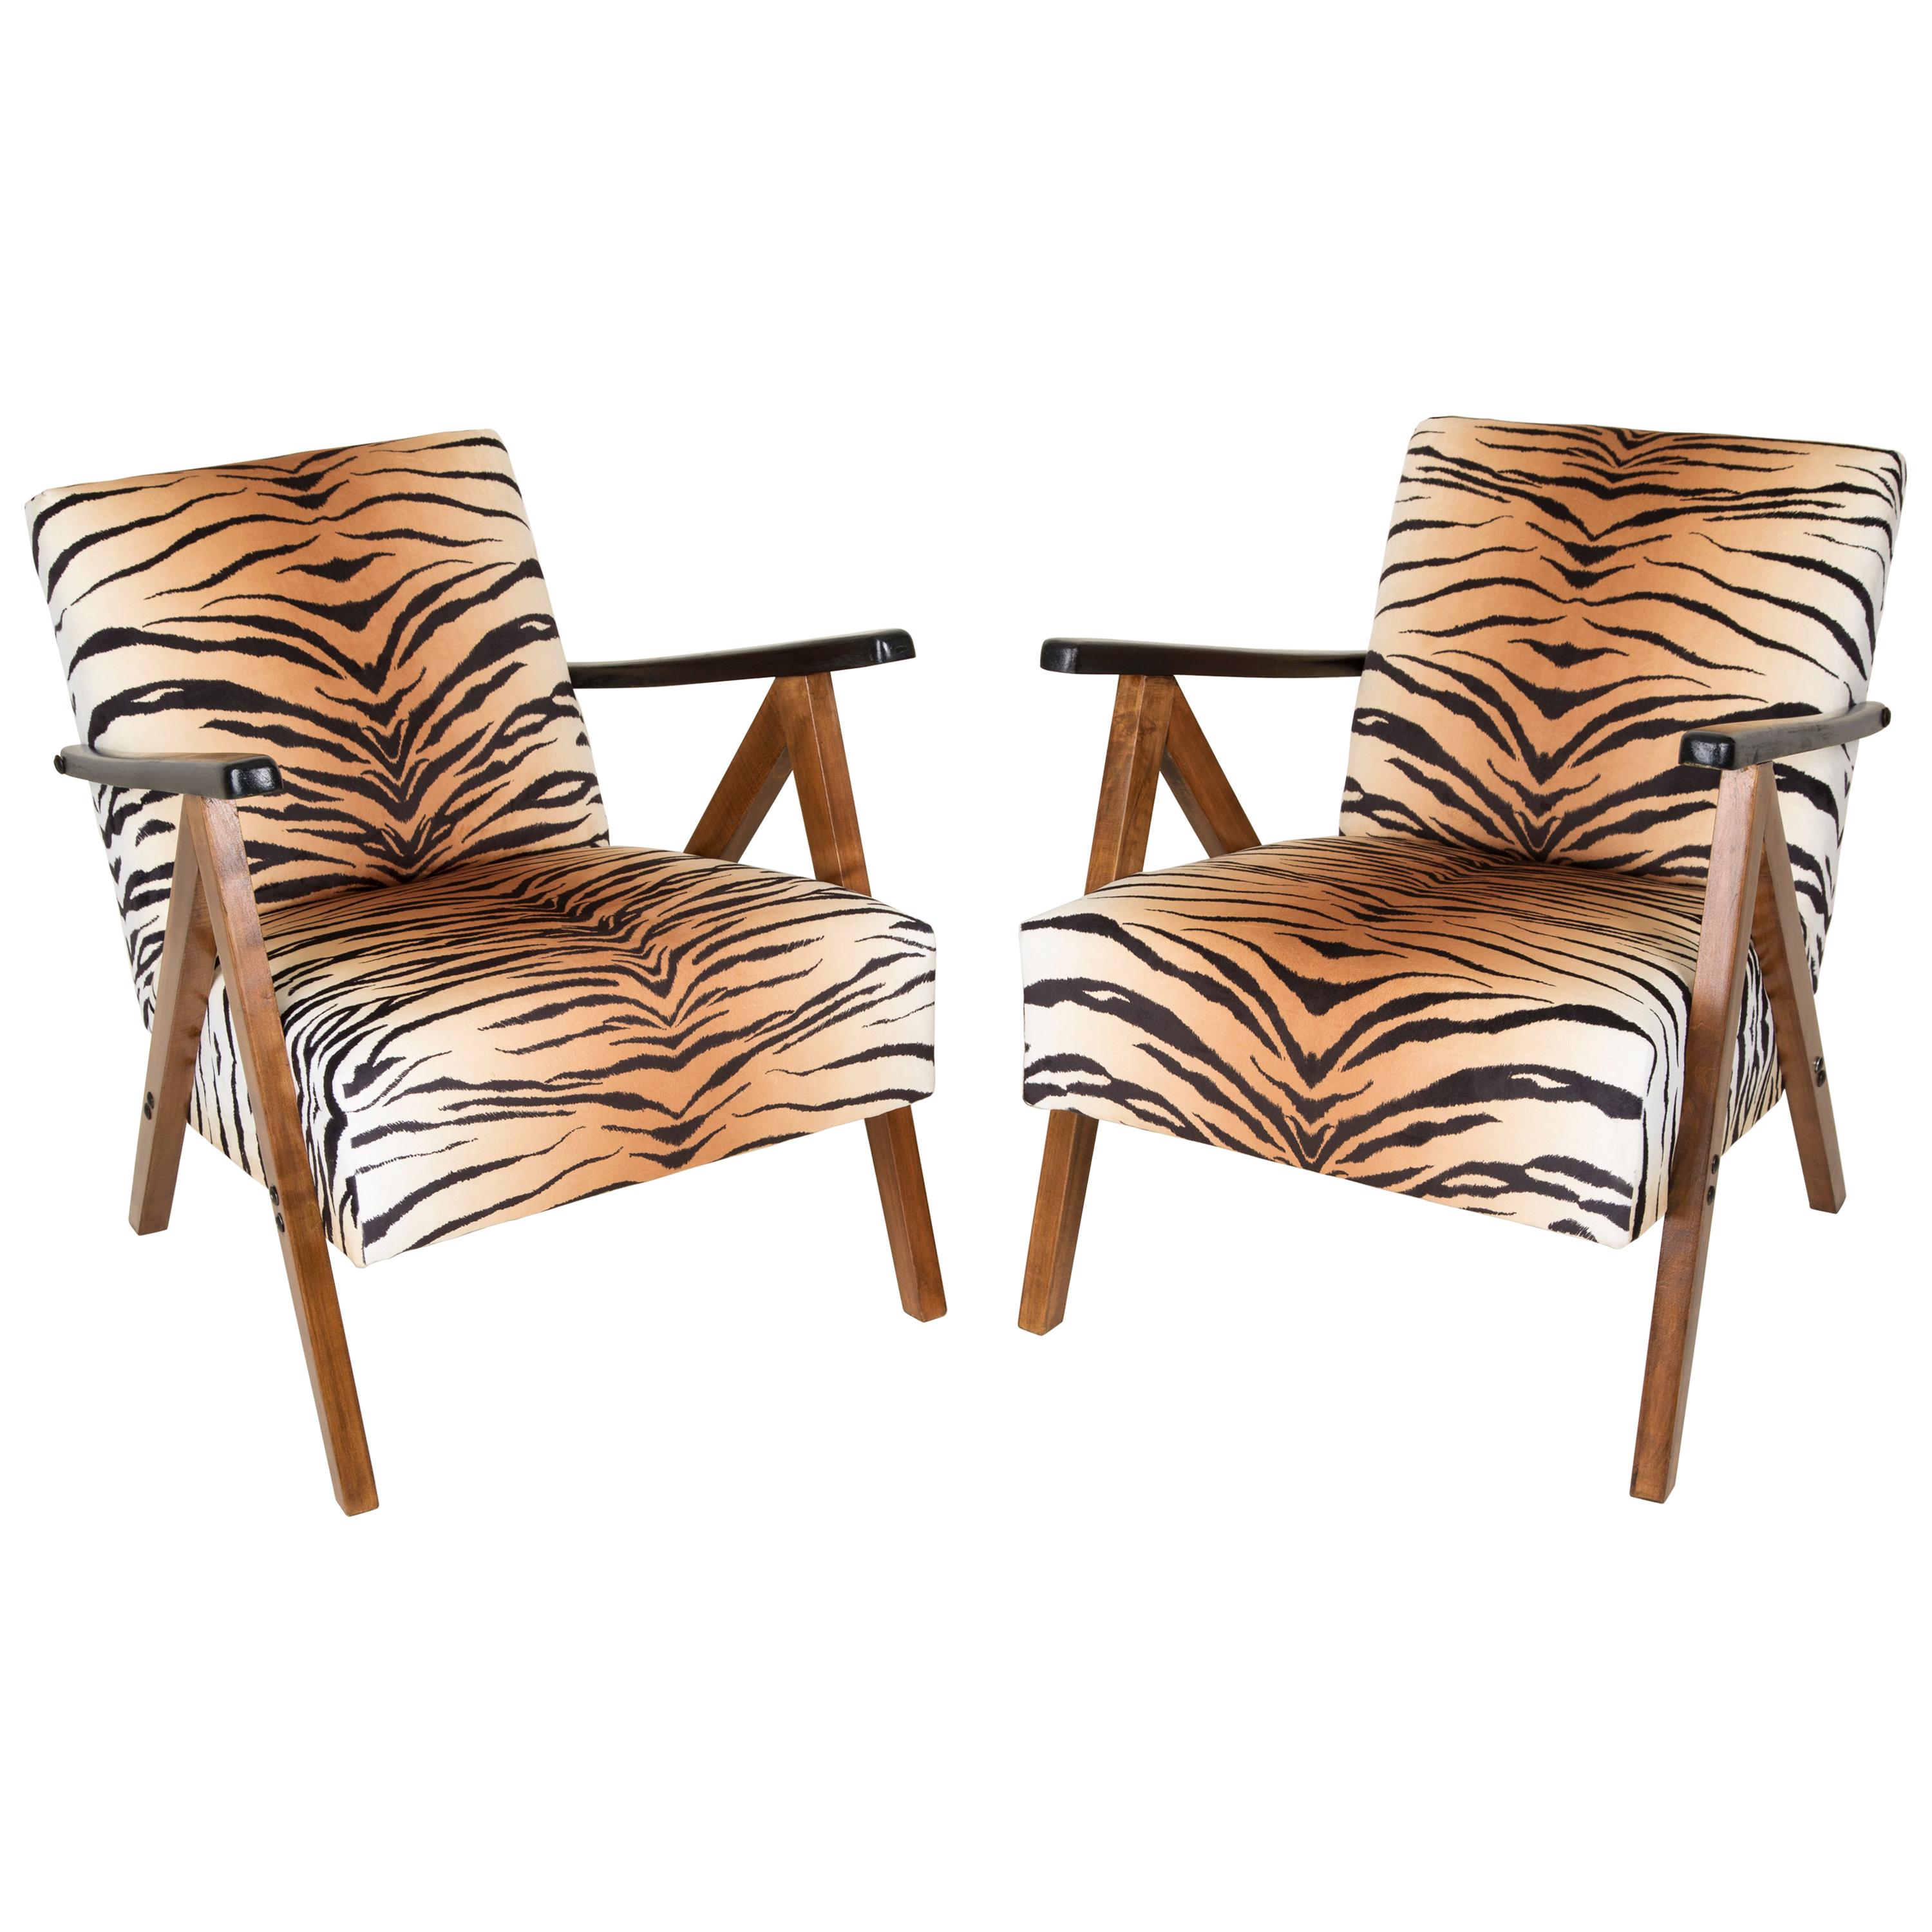 Set of Two Mid-Century Modern Tiger Print Armchairs, 1960s, Germany